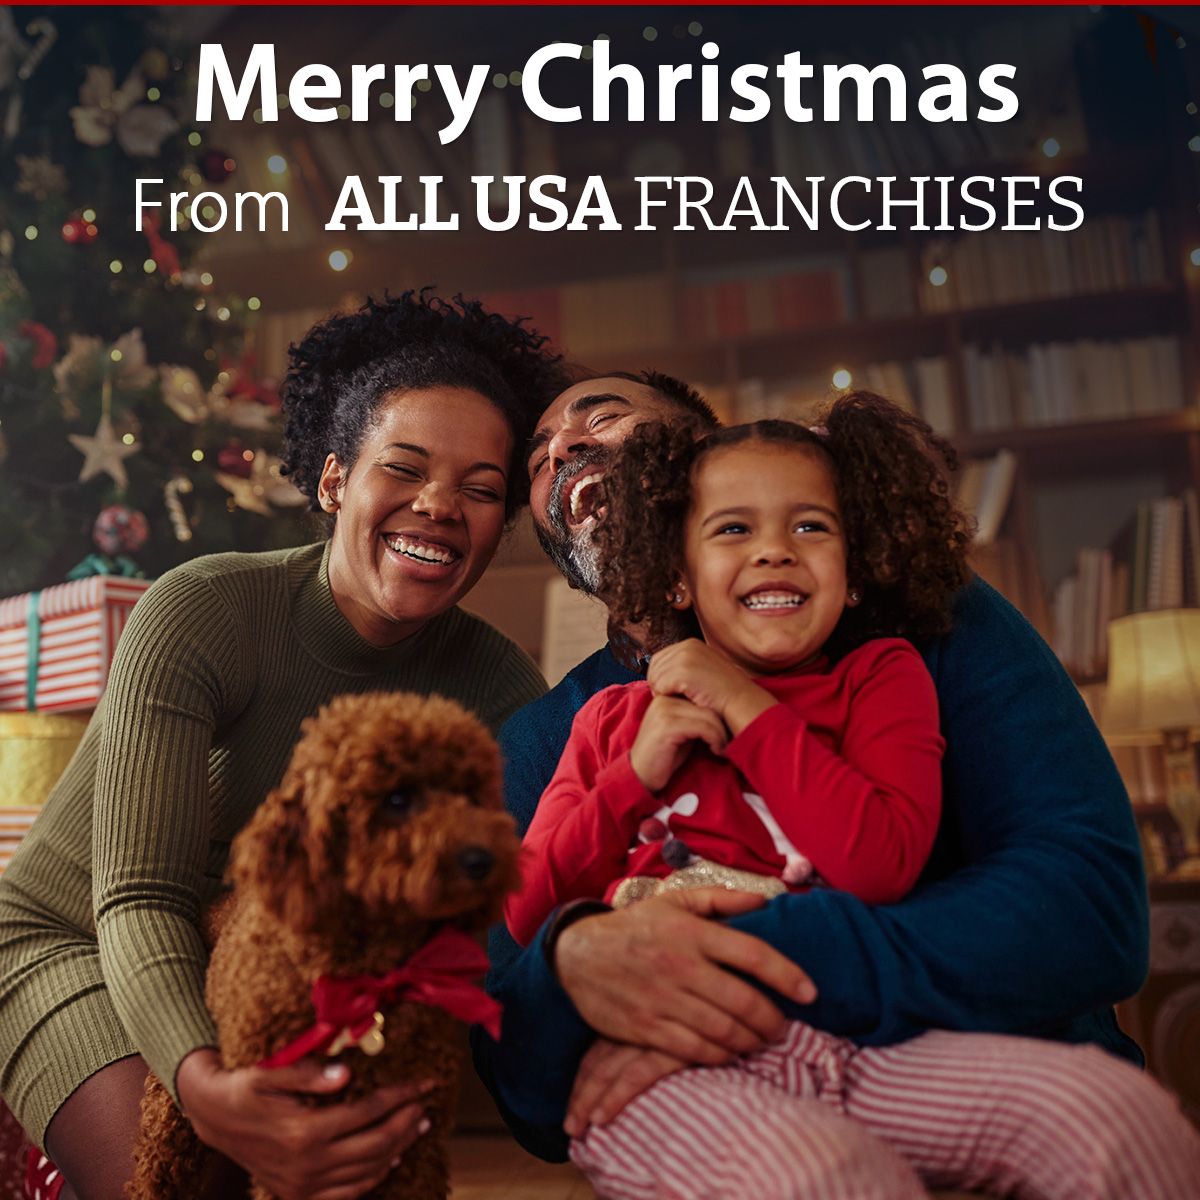 Merry Christmas From All USA Franchises!